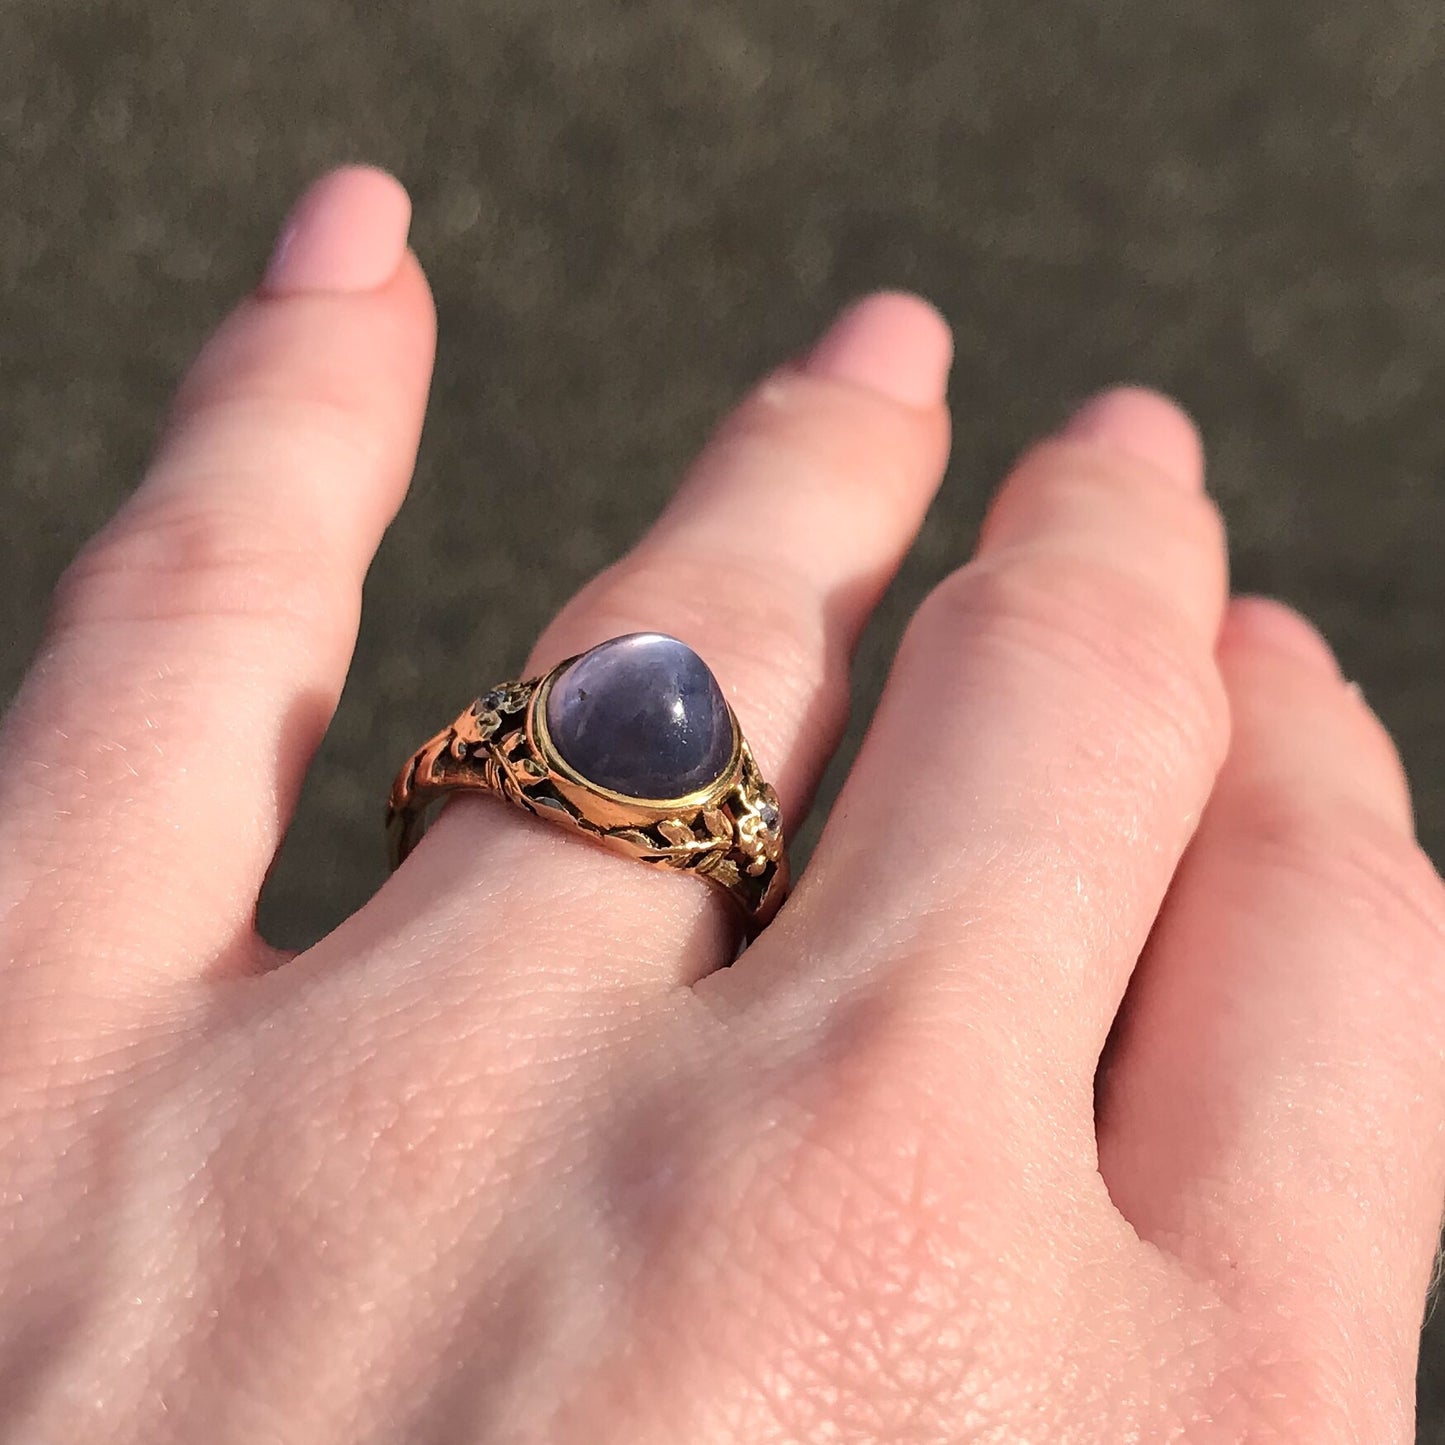 SOLD--Arts & Crafts Edward Oakes Star Sapphire and Diamond Ring 18k c. 1920